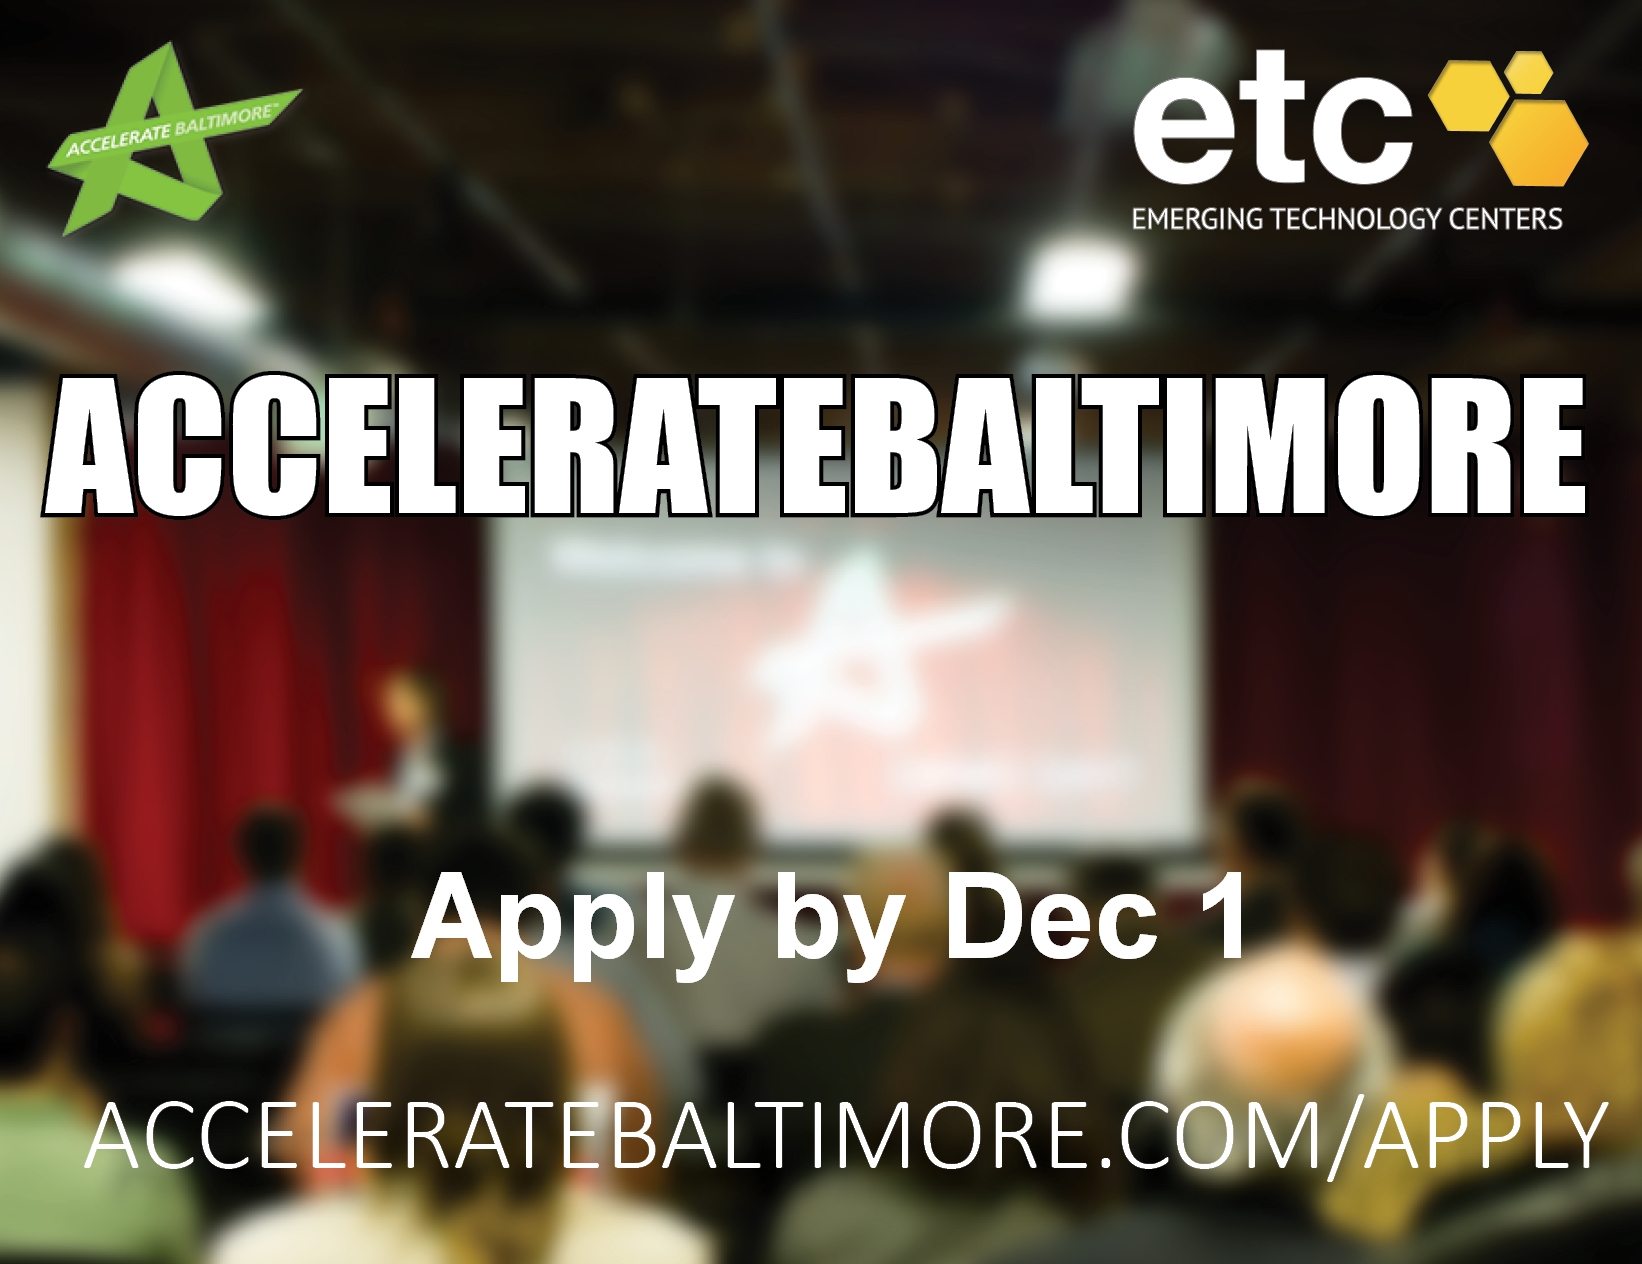 Don't wait.  Applications close on December 1st, 2015